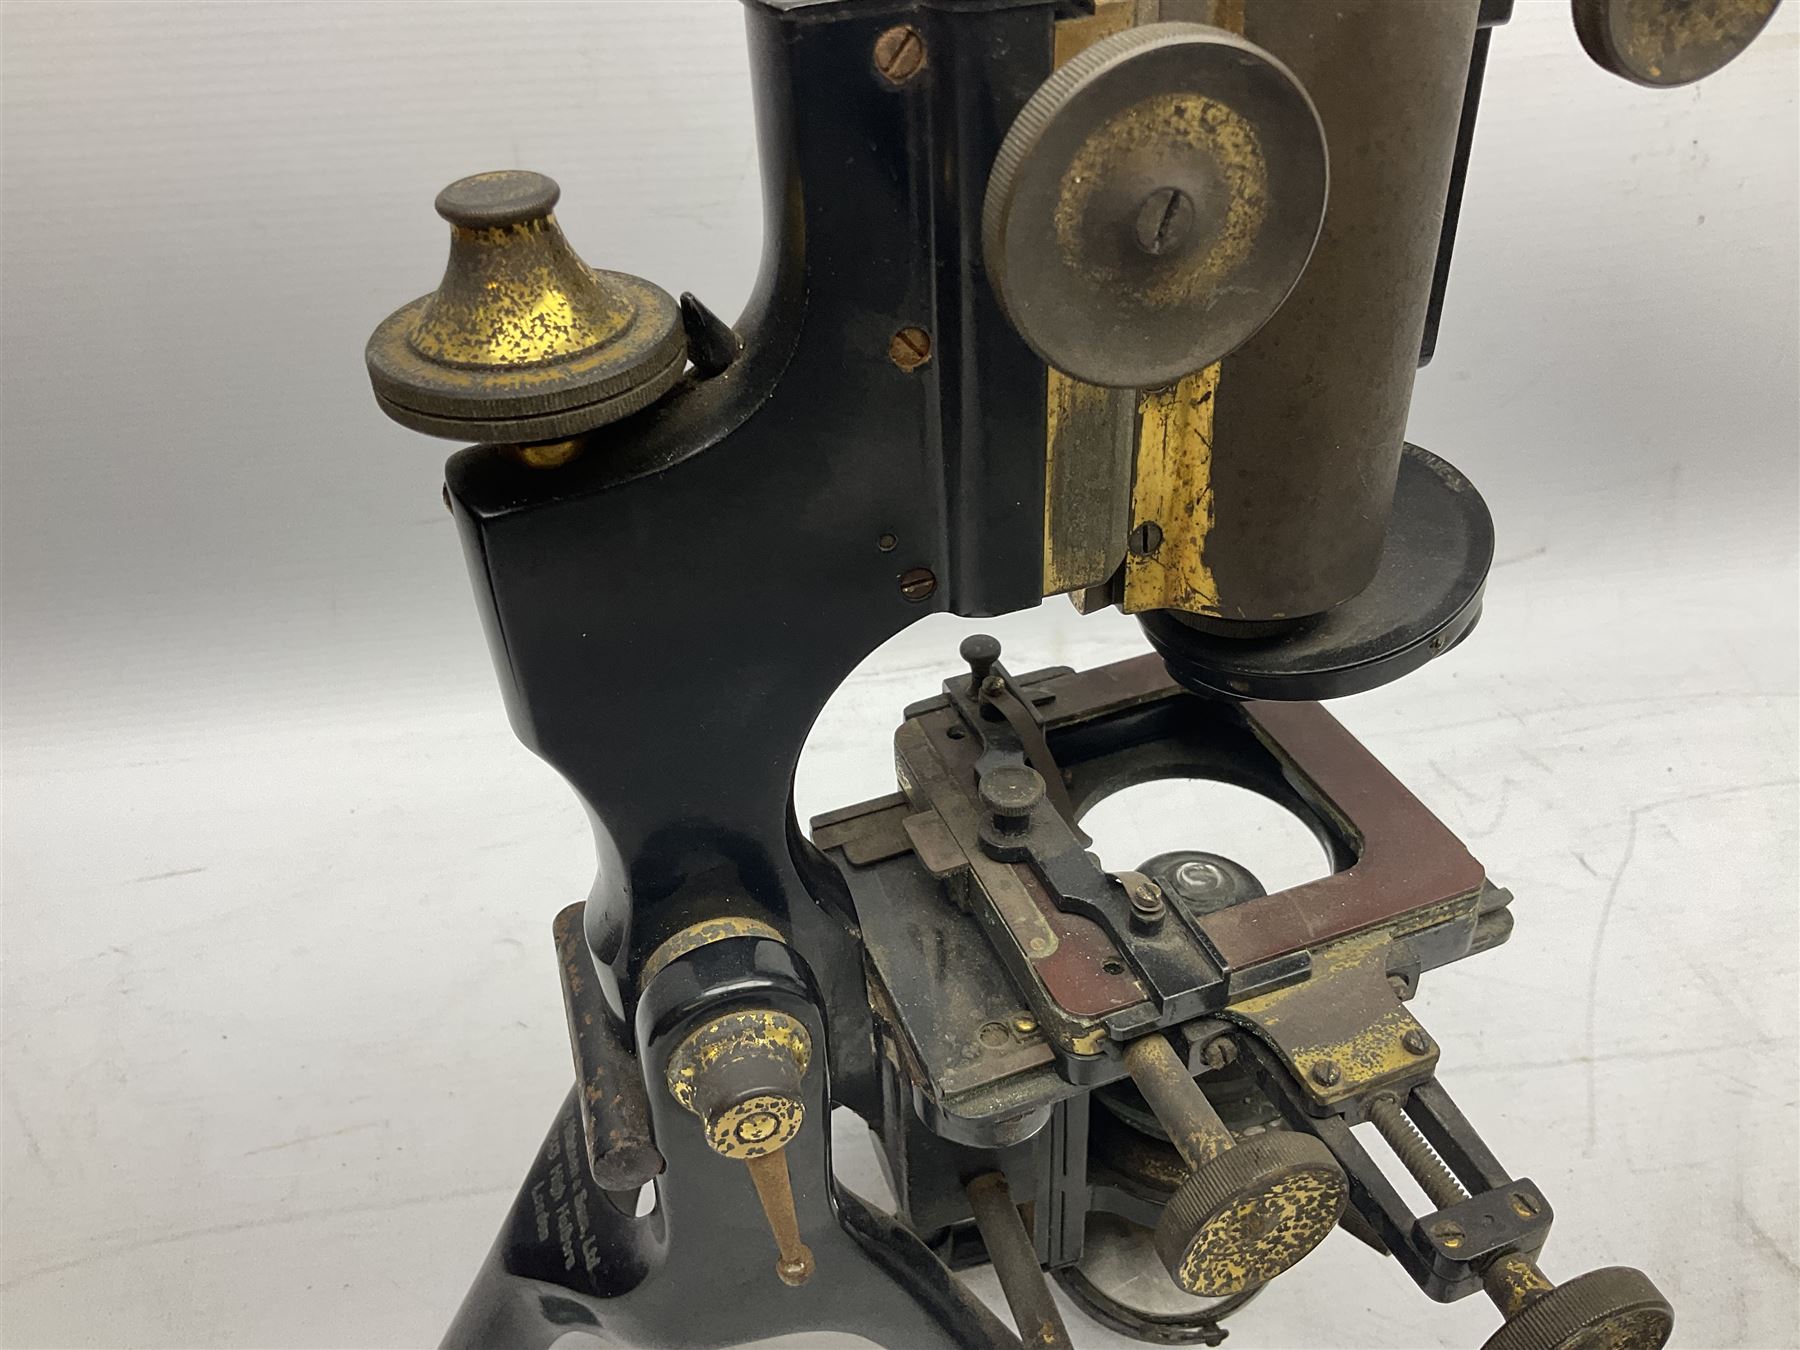 19th century brass and black japanned monocular microscope by W. Watson & Sons Ltd. 313 High Holborn - Image 10 of 15